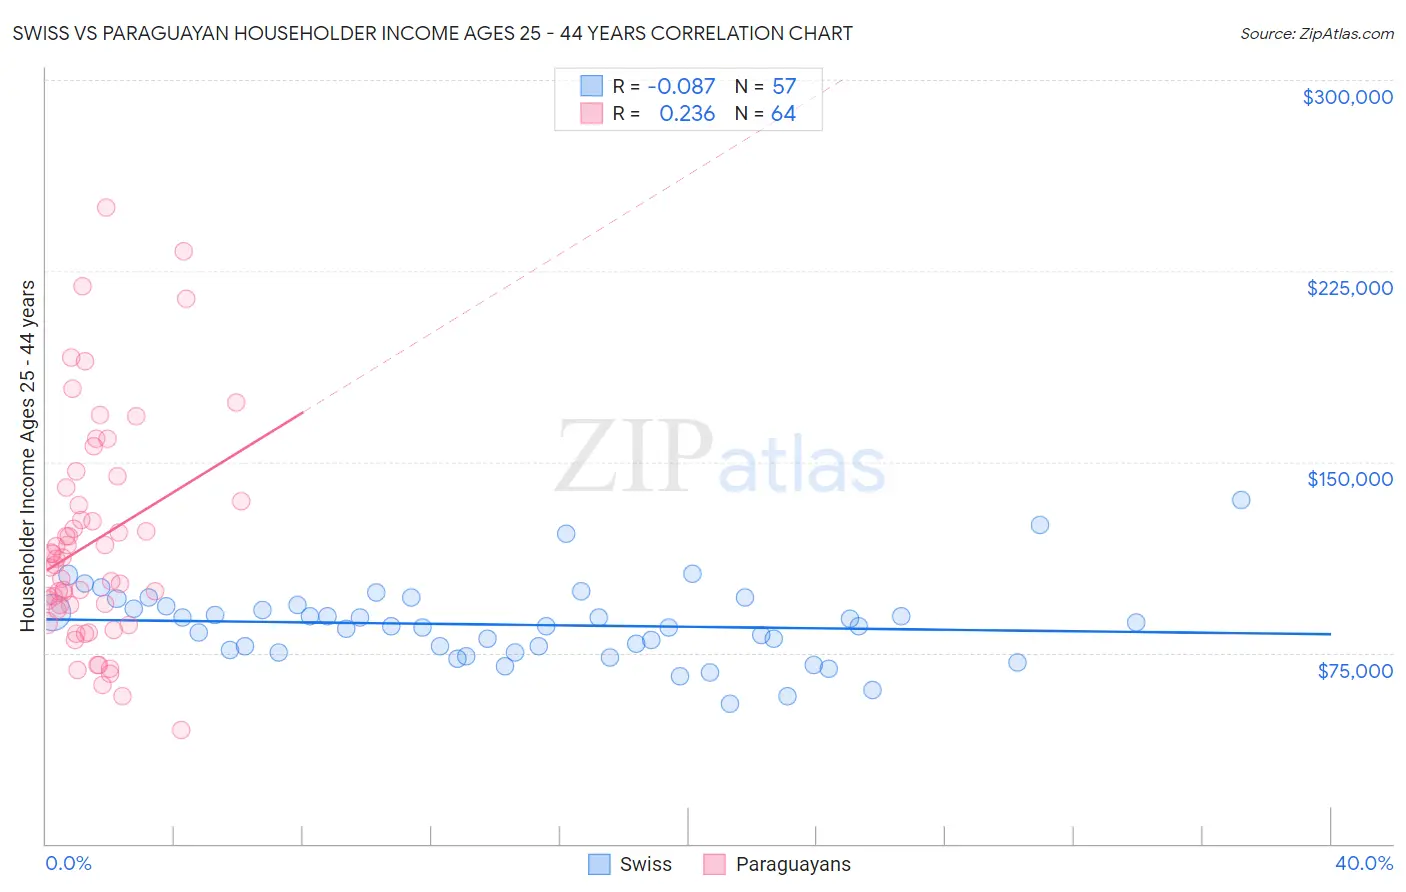 Swiss vs Paraguayan Householder Income Ages 25 - 44 years